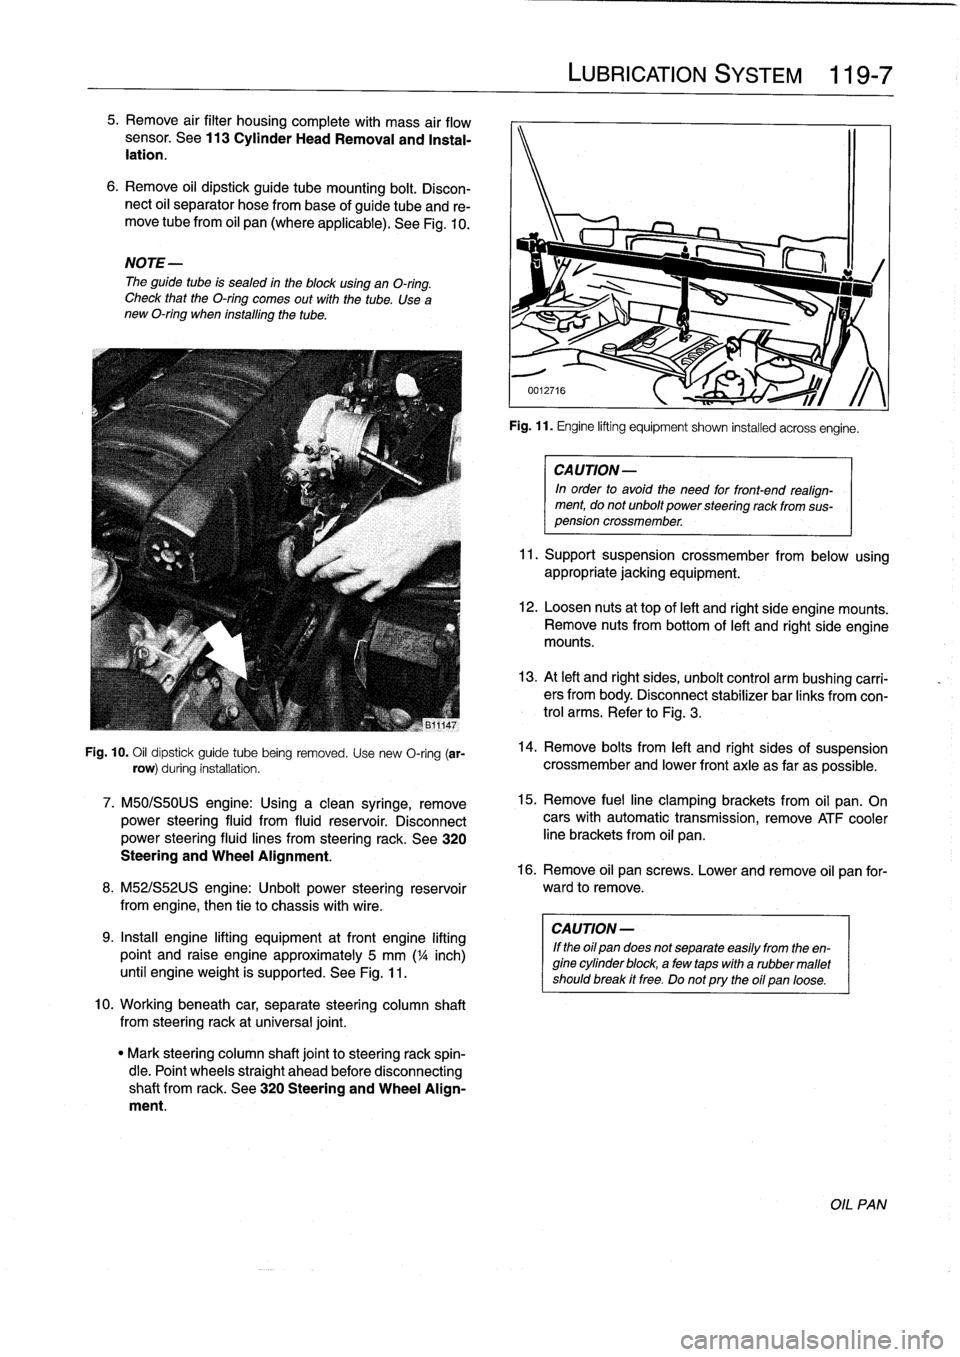 BMW 328i 1994 E36 Workshop Manual 
5
.
Remove
air
filter
housingcomplete
with
mass
air
flow
sensor
.
See113
Cylinder
HeadRemoval
and
Instal-
lation
.

6
.
Remove
oil
dipstick
guide
tube
mounting
bolt
.
Discon-
nect
oil
separator
hose
